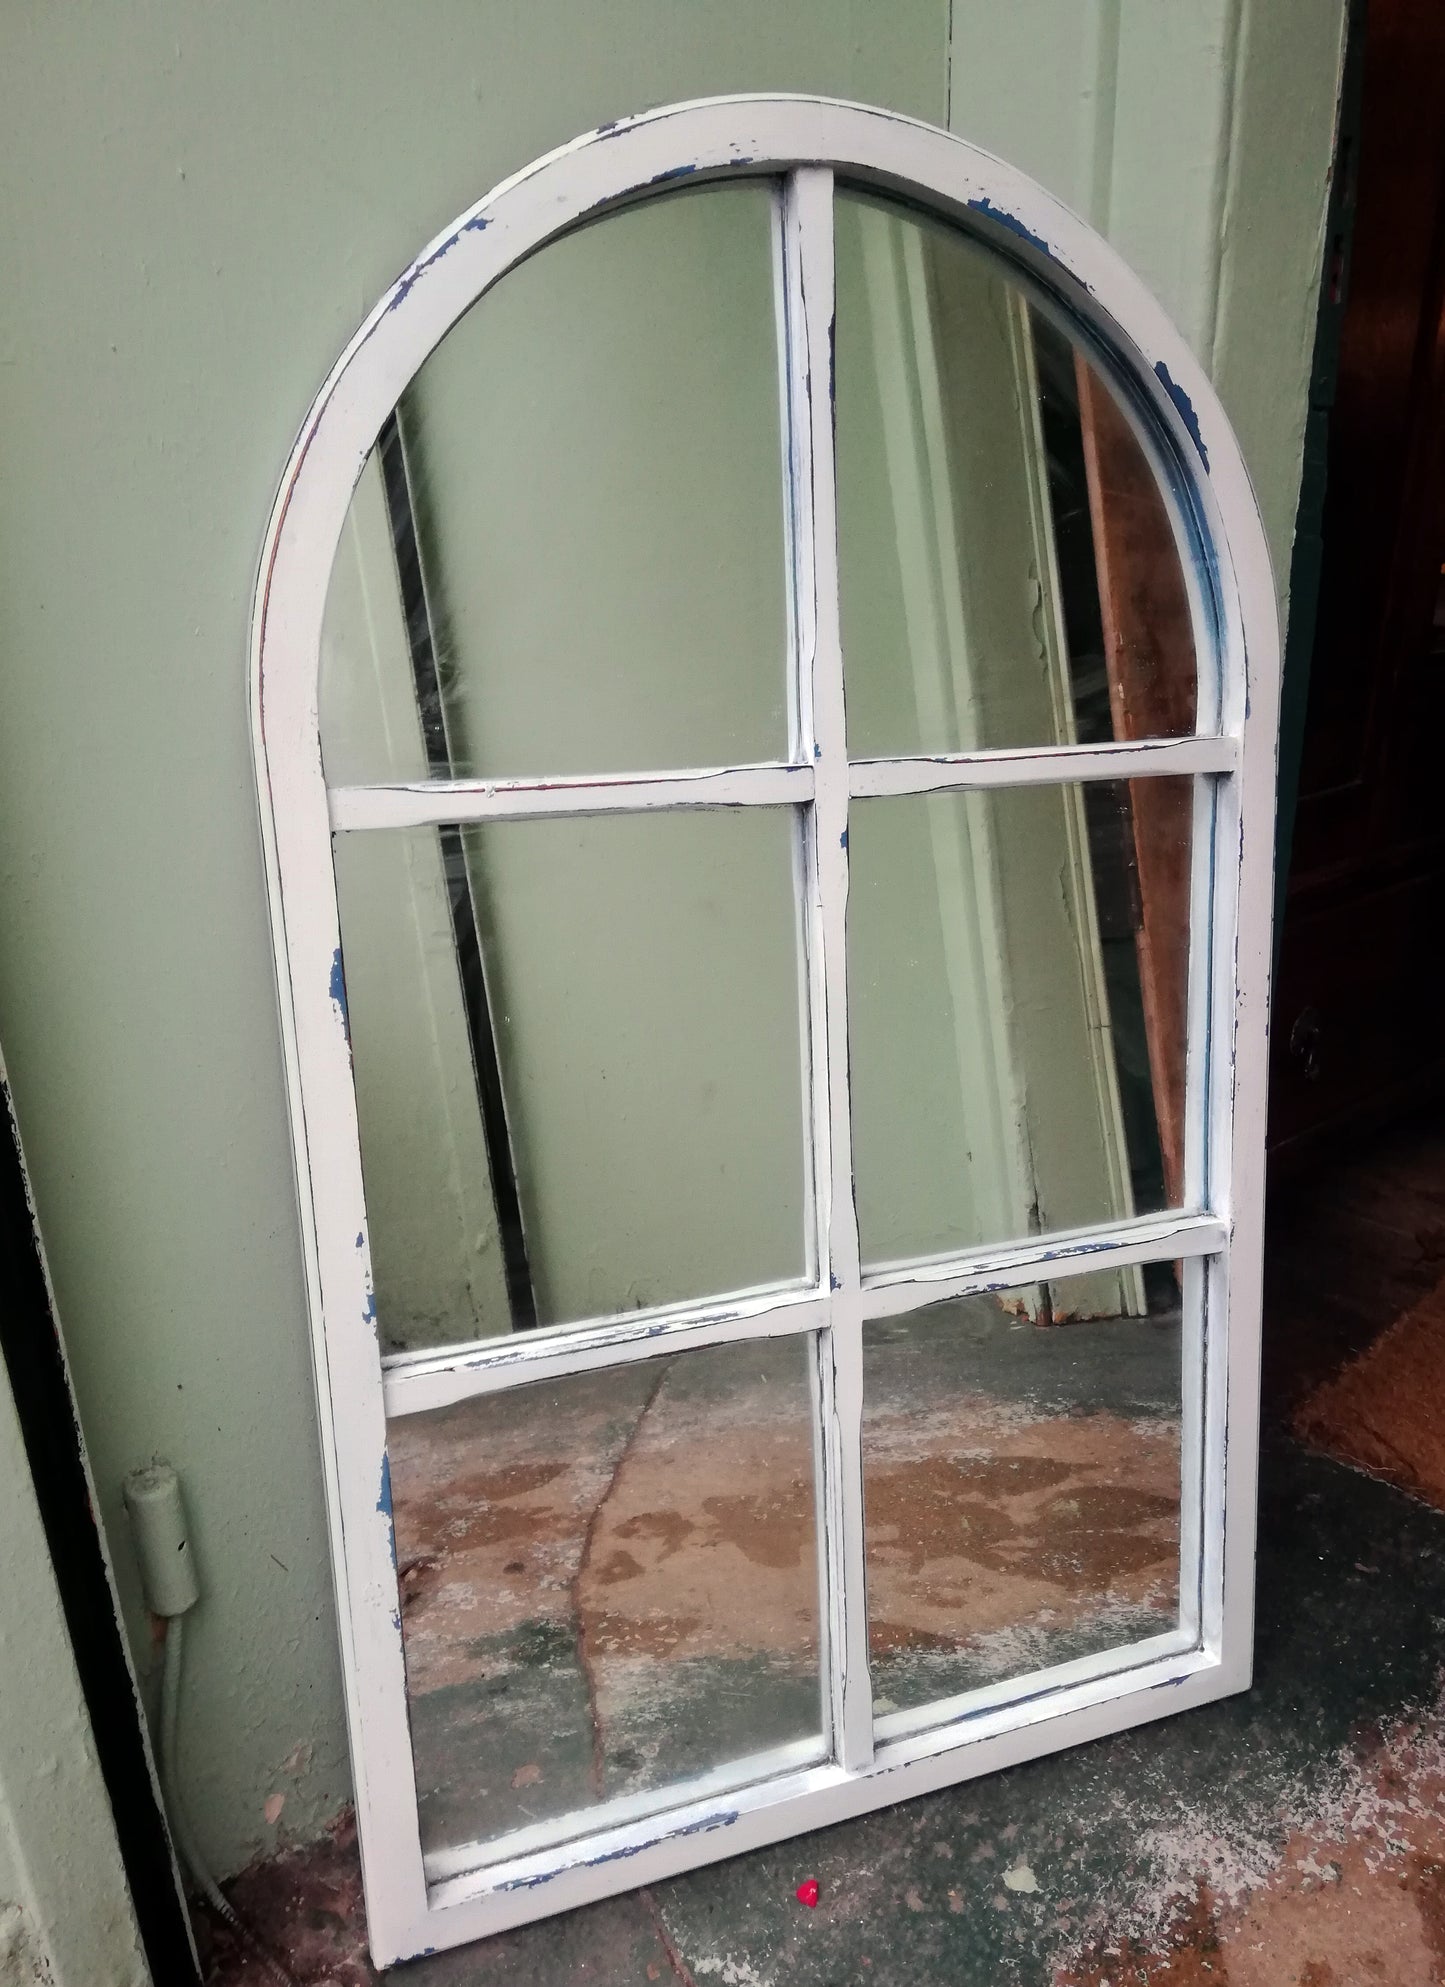 Curved window frame mirror painted in blue and white milk paint